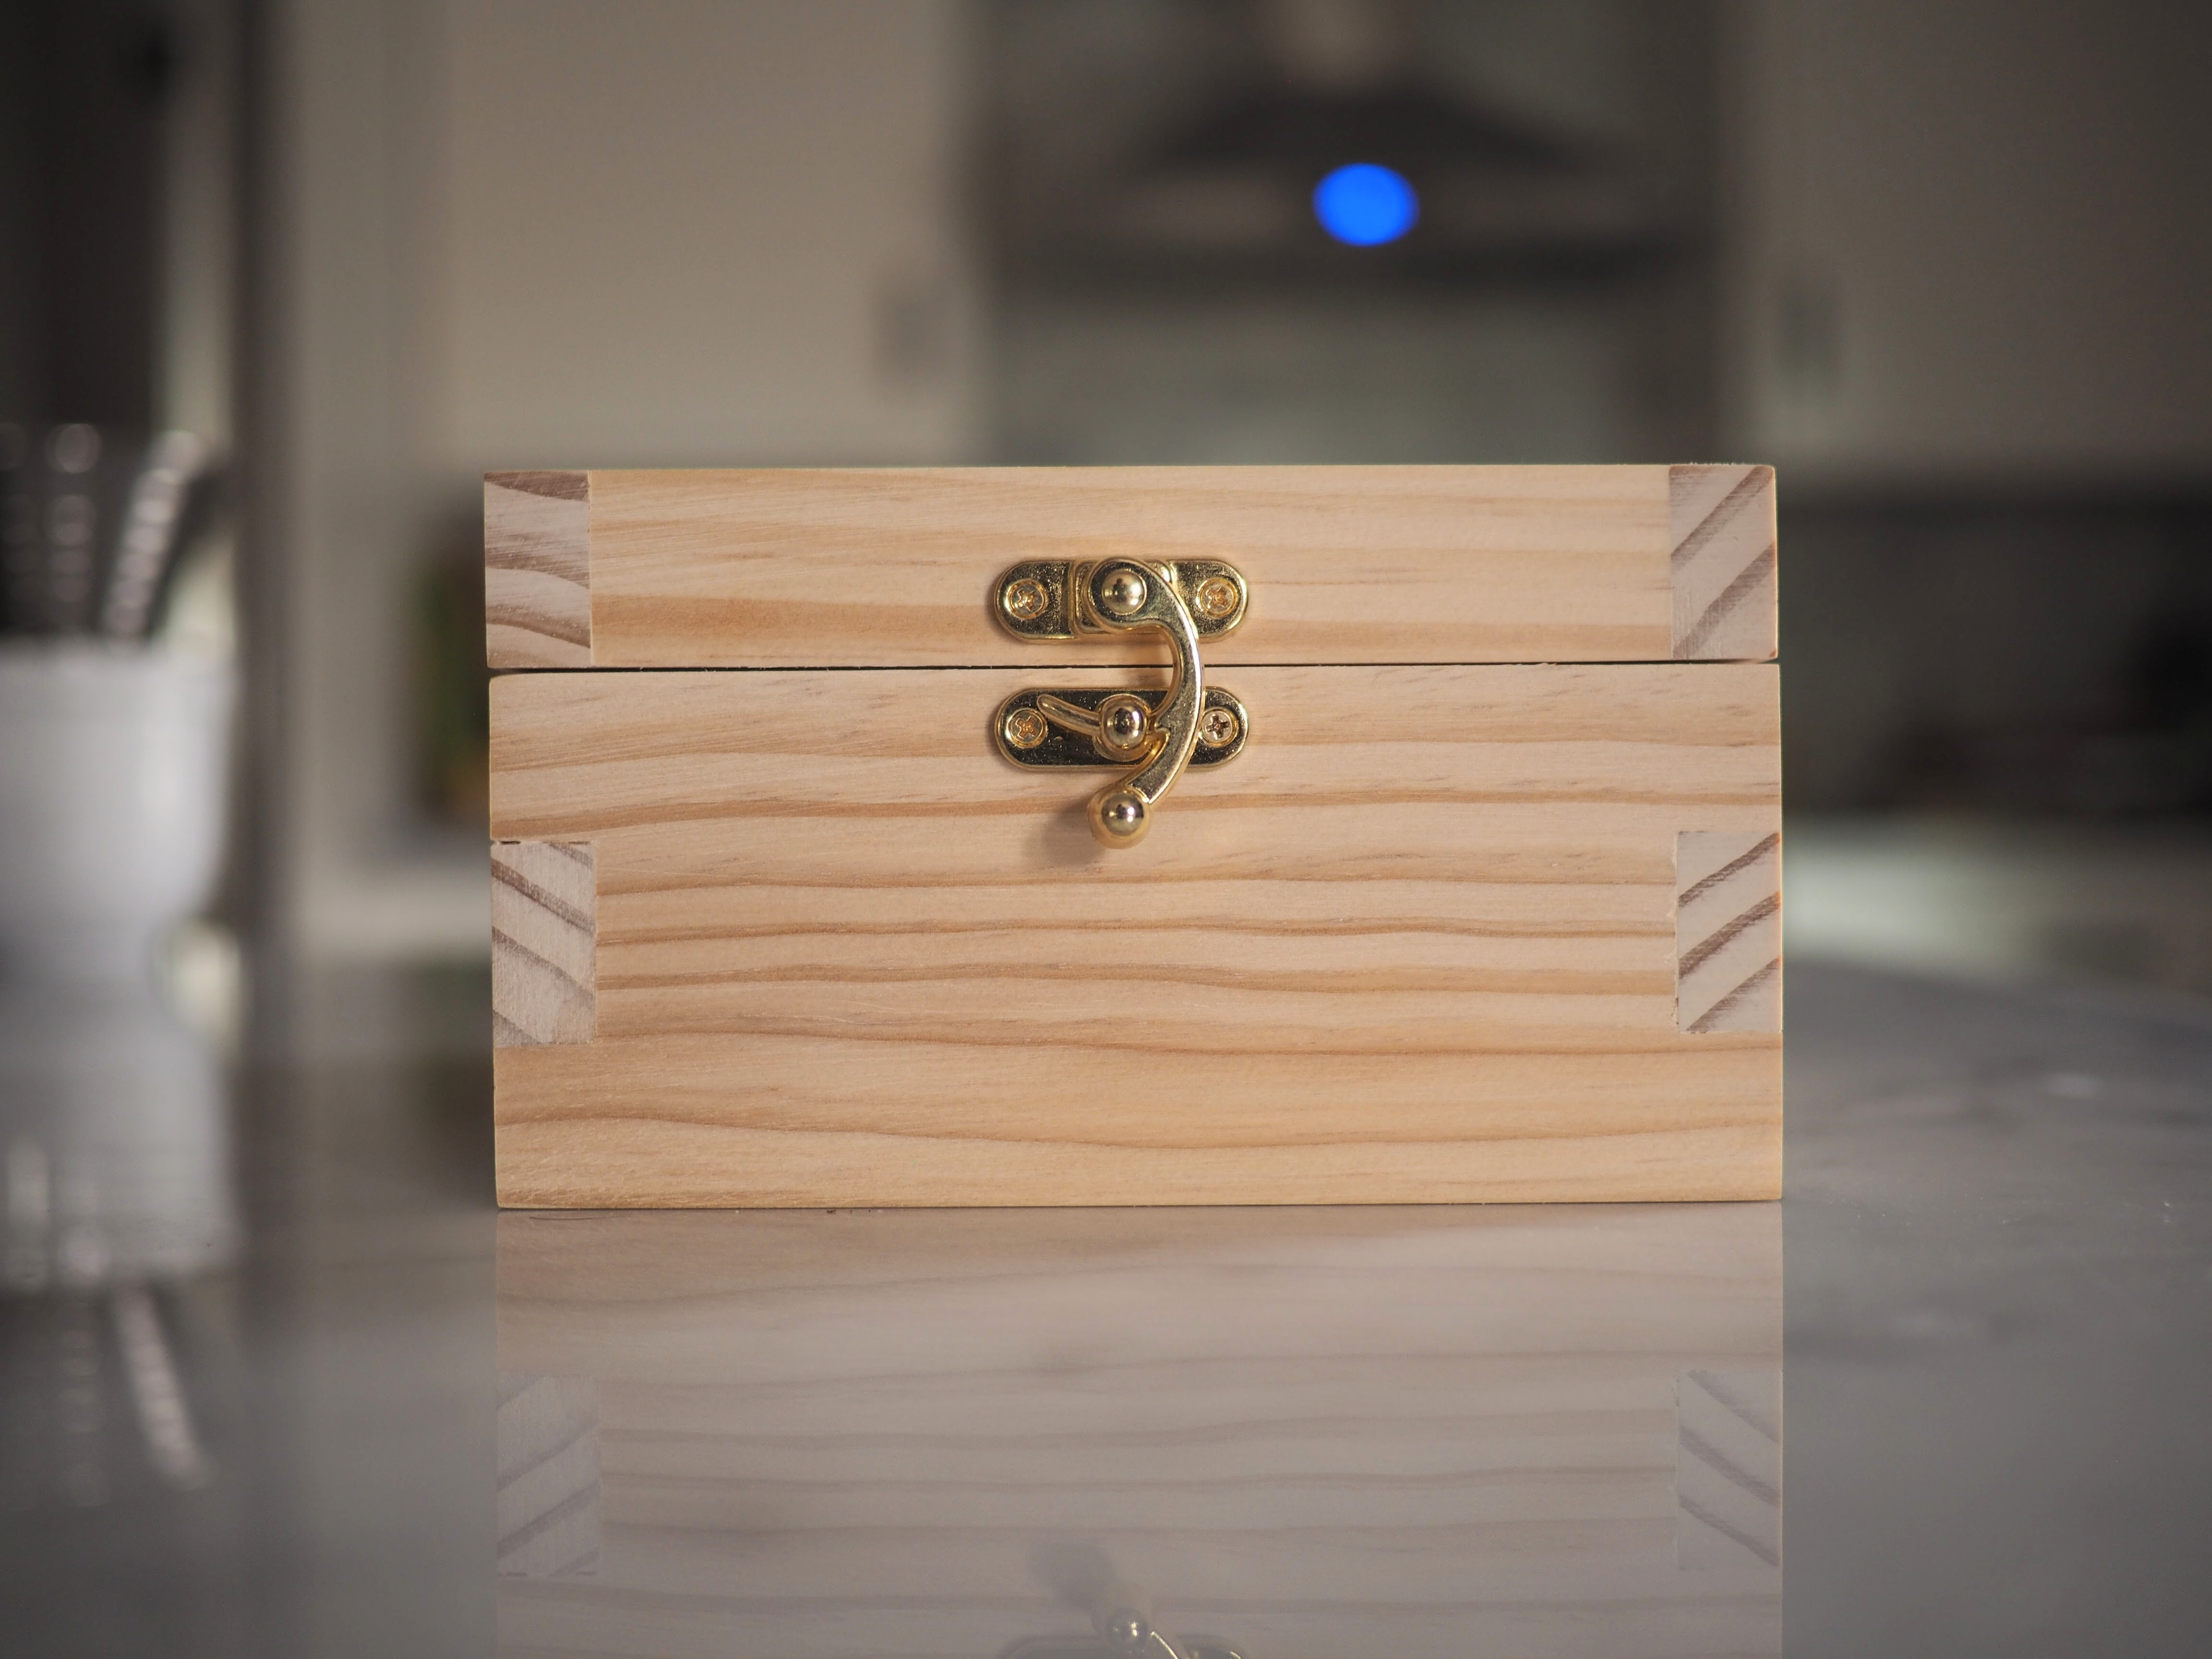 A front-on view of the box showing the contrasting grain direction of the box joints and the semicircular brass latch. The box is reflected in the marble countertop.